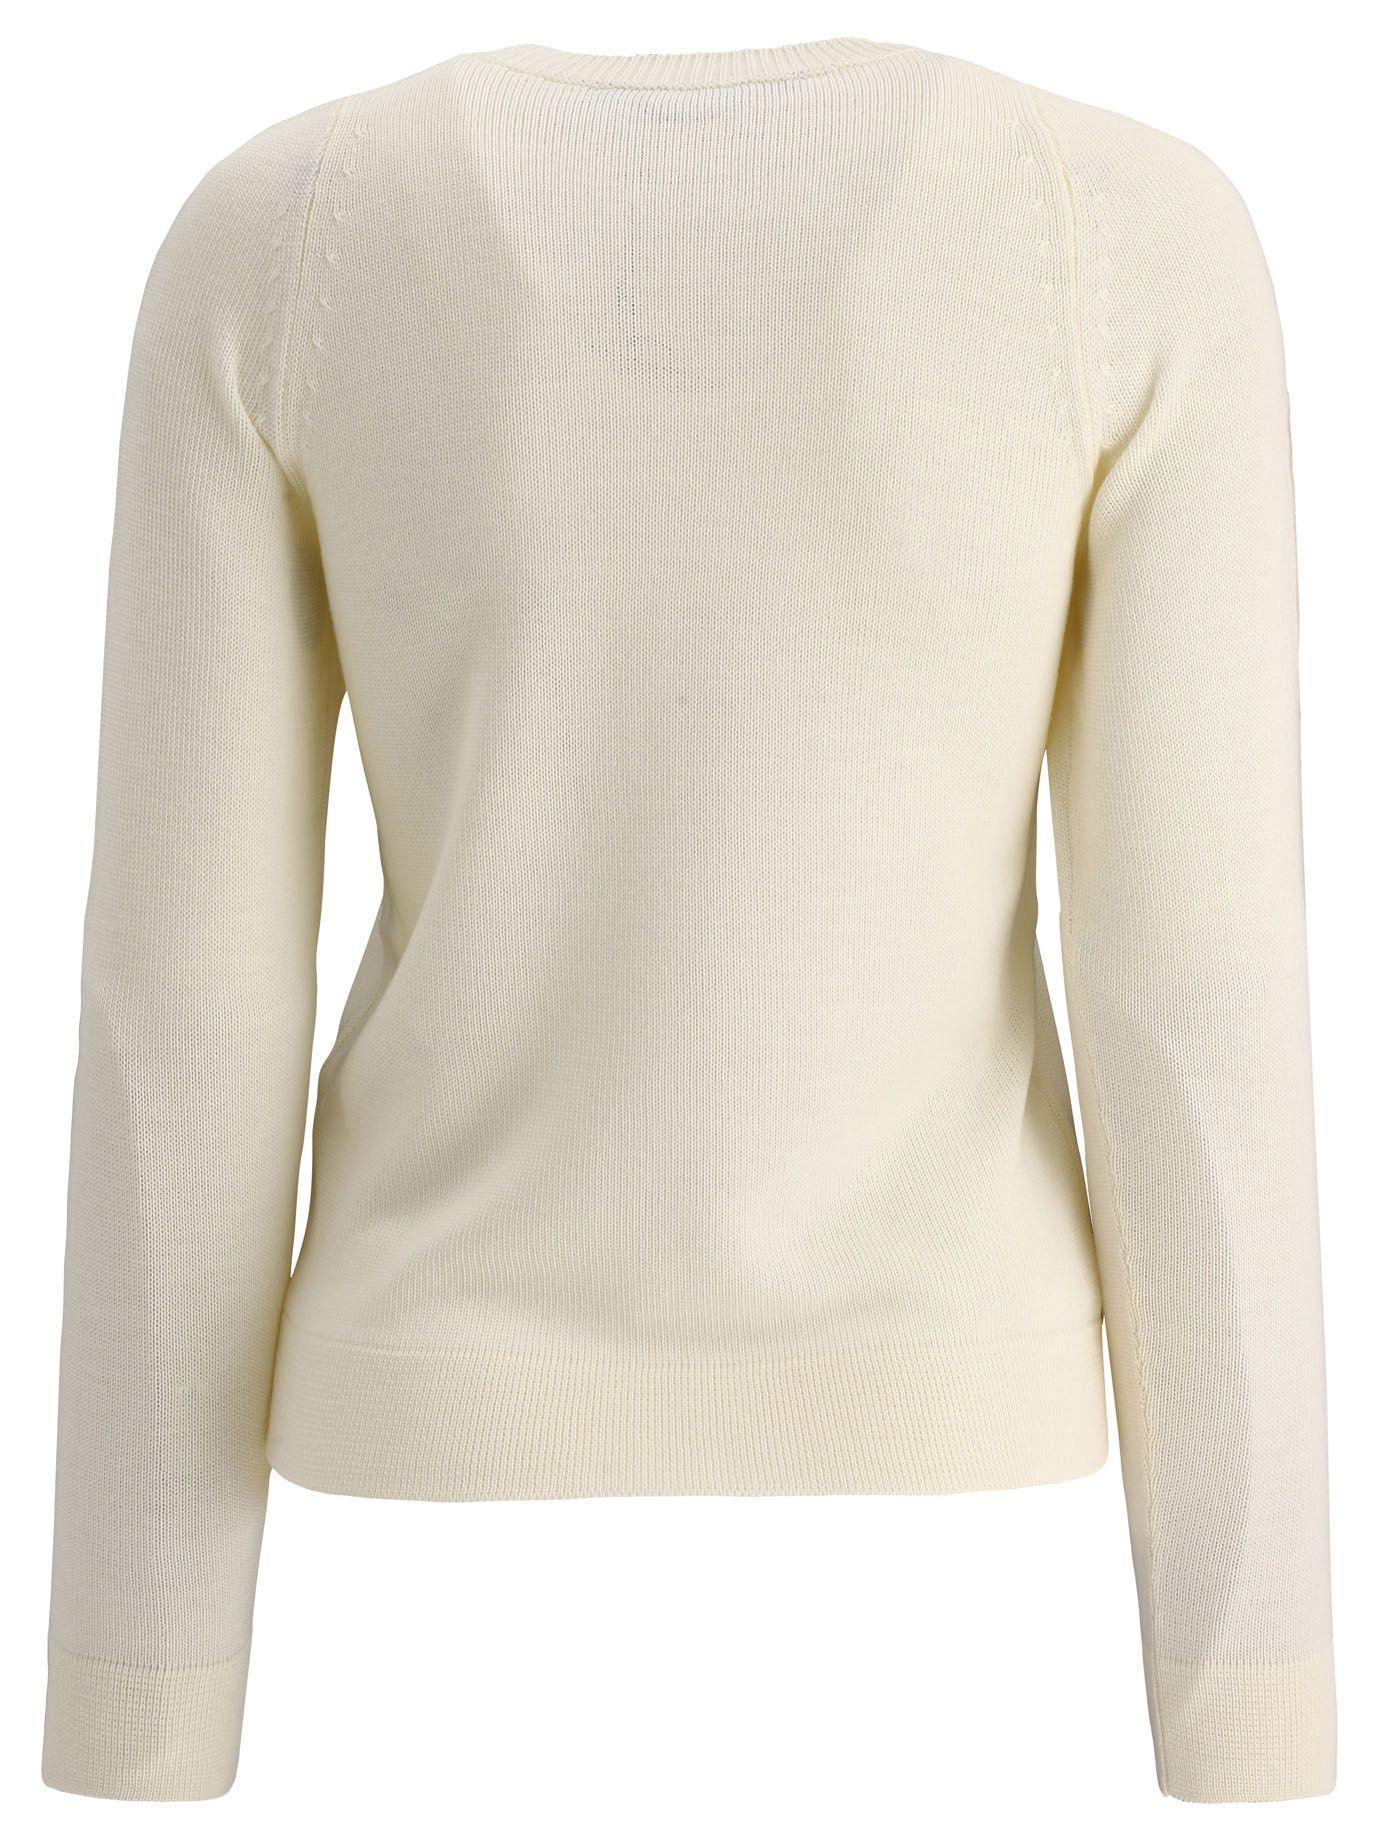 Canada Goose Women's Sweater in Natural | Lyst